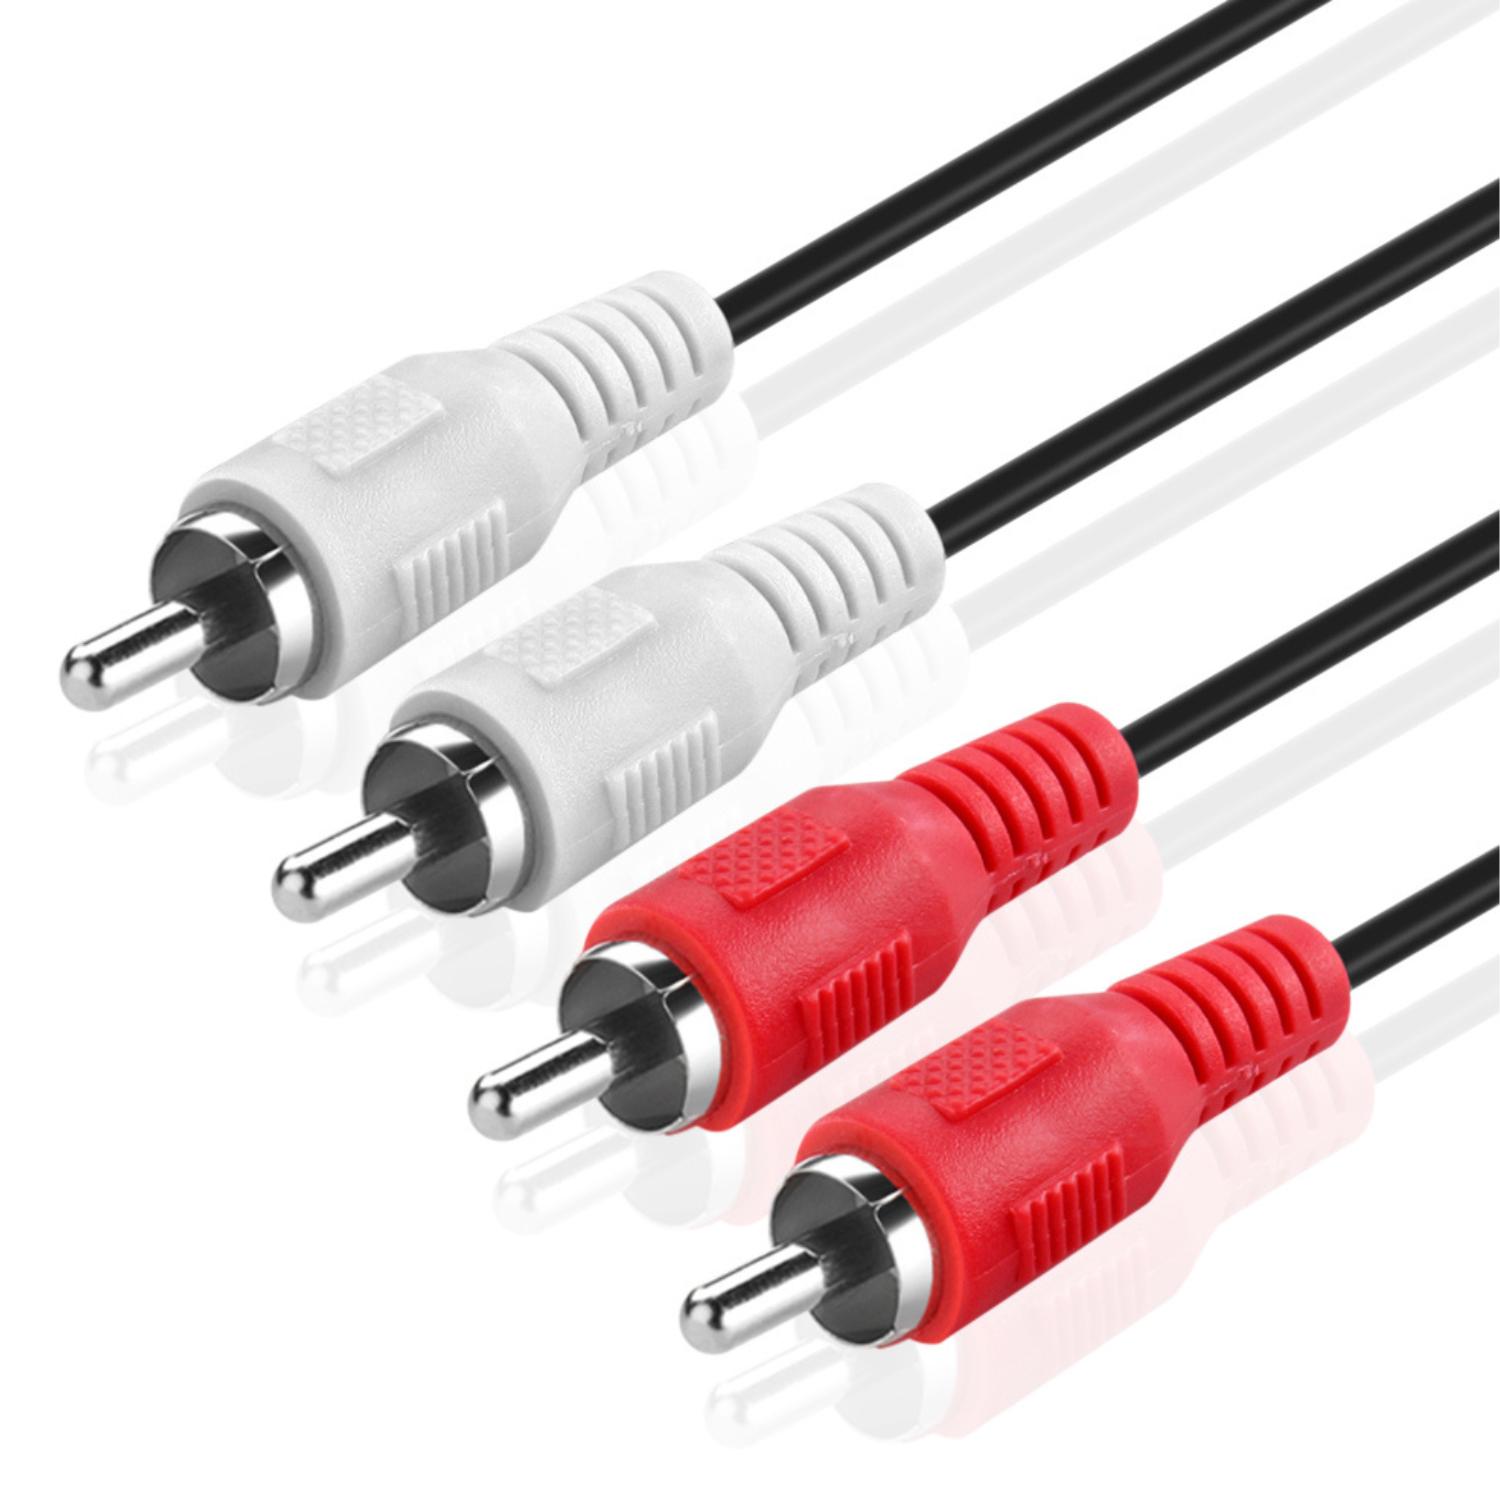 2RCA Stereo Audio Cable (15 Feet) - Dual Composite RCA Male Connector M/M 2 Channel (Right and Left) (Red and White) Shielded 2RCA to 2RCA AV Sound Plug Jack Wire Cord - image 1 of 6